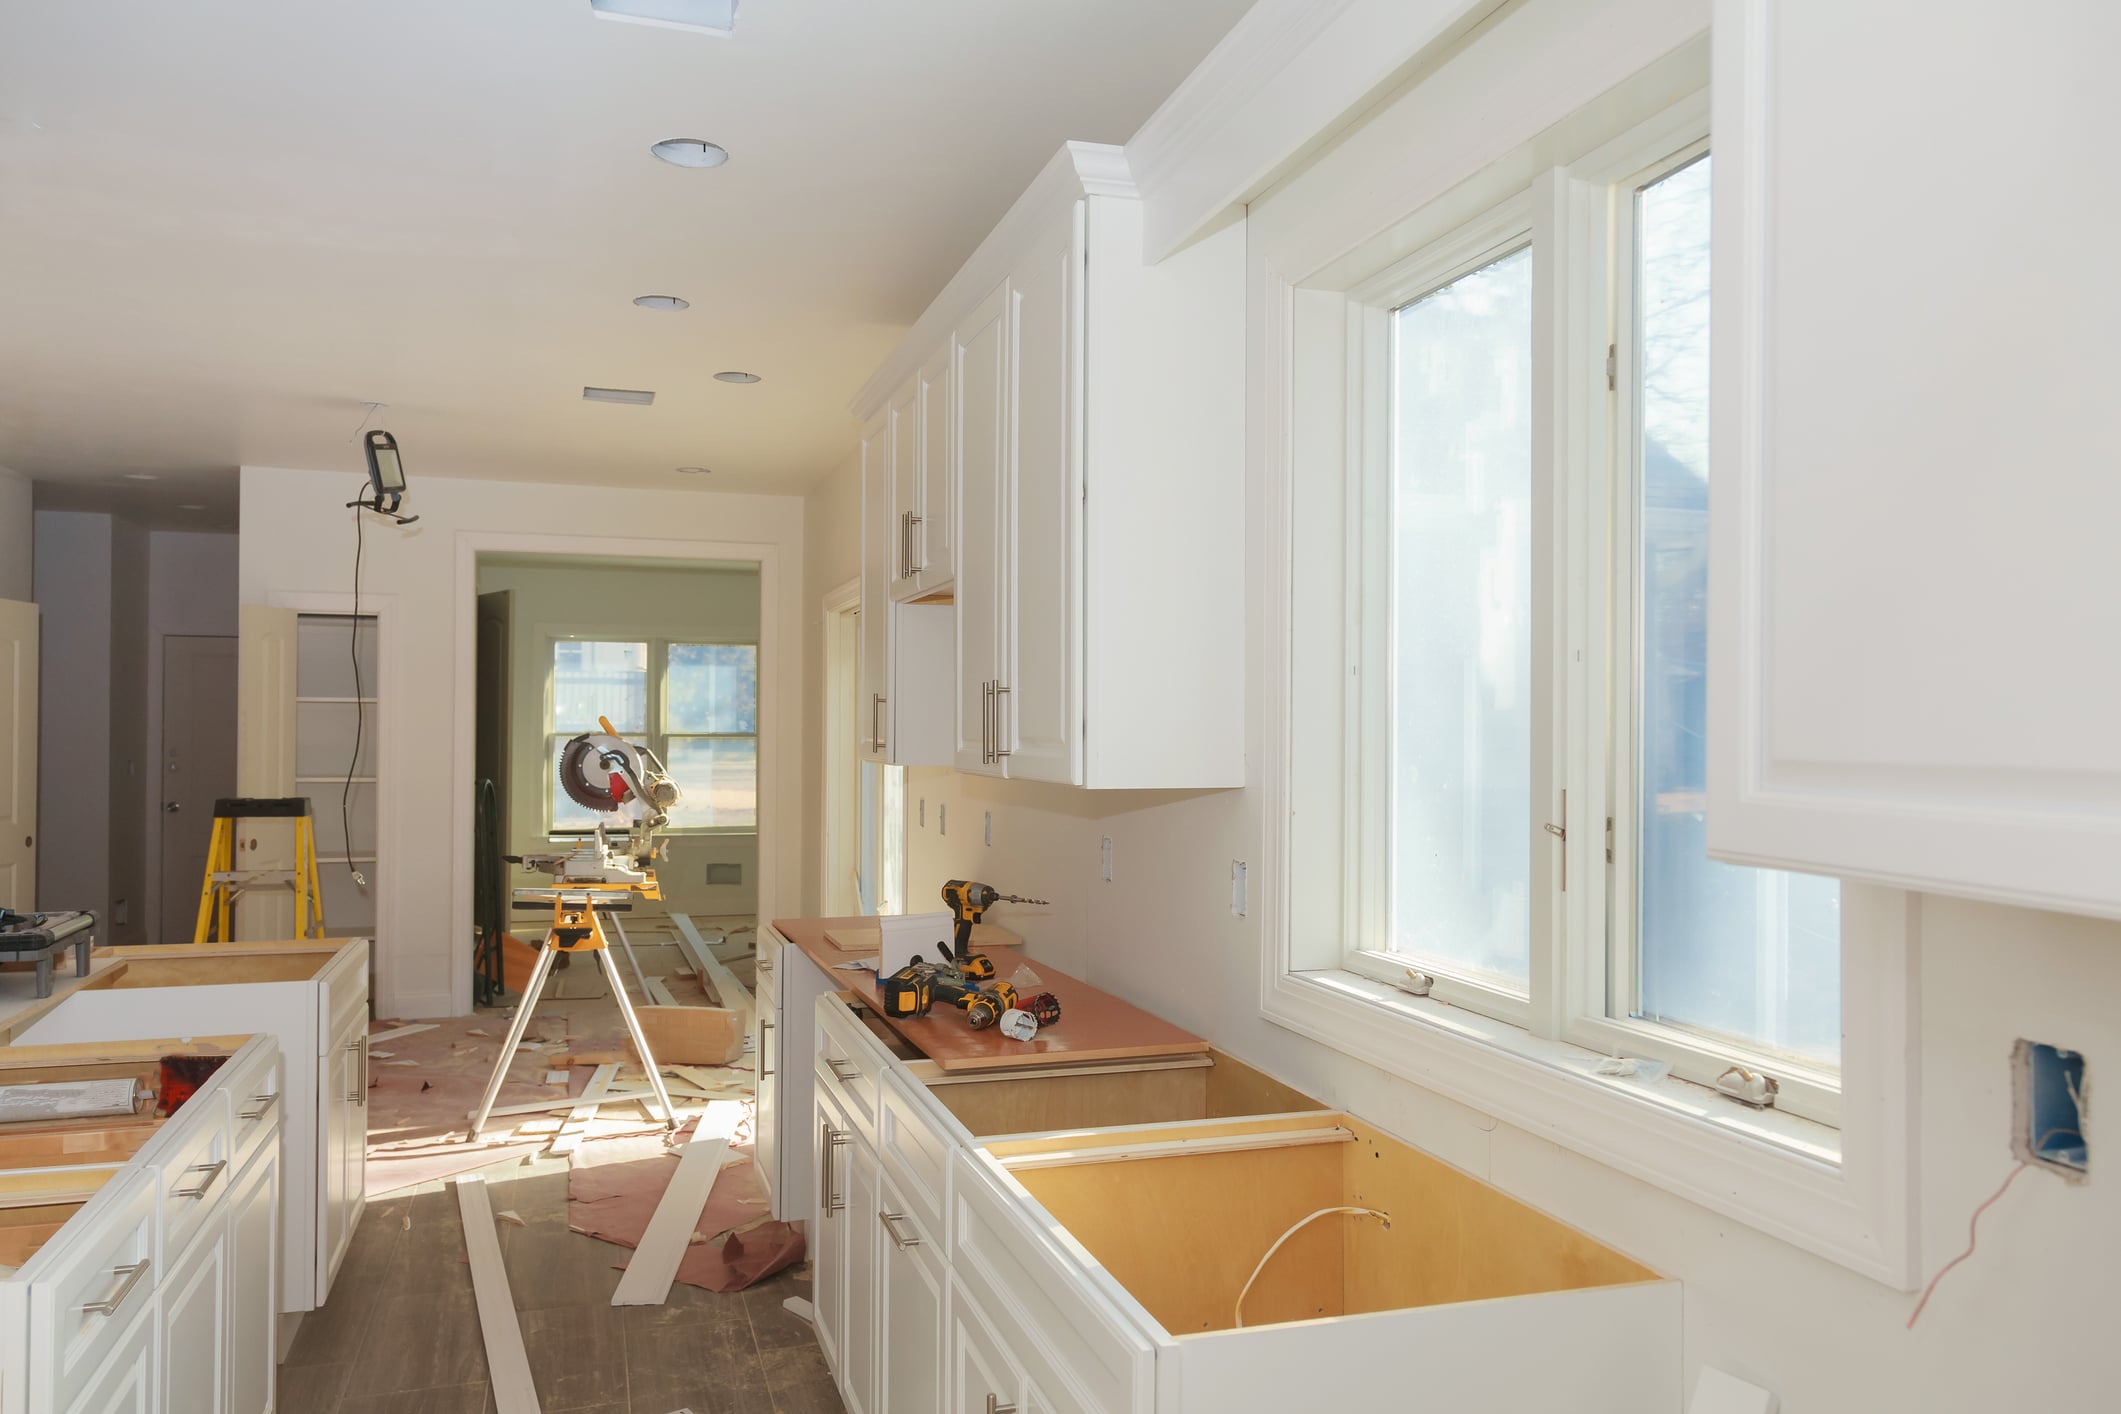 What Renovations Increase Home Value the Most?